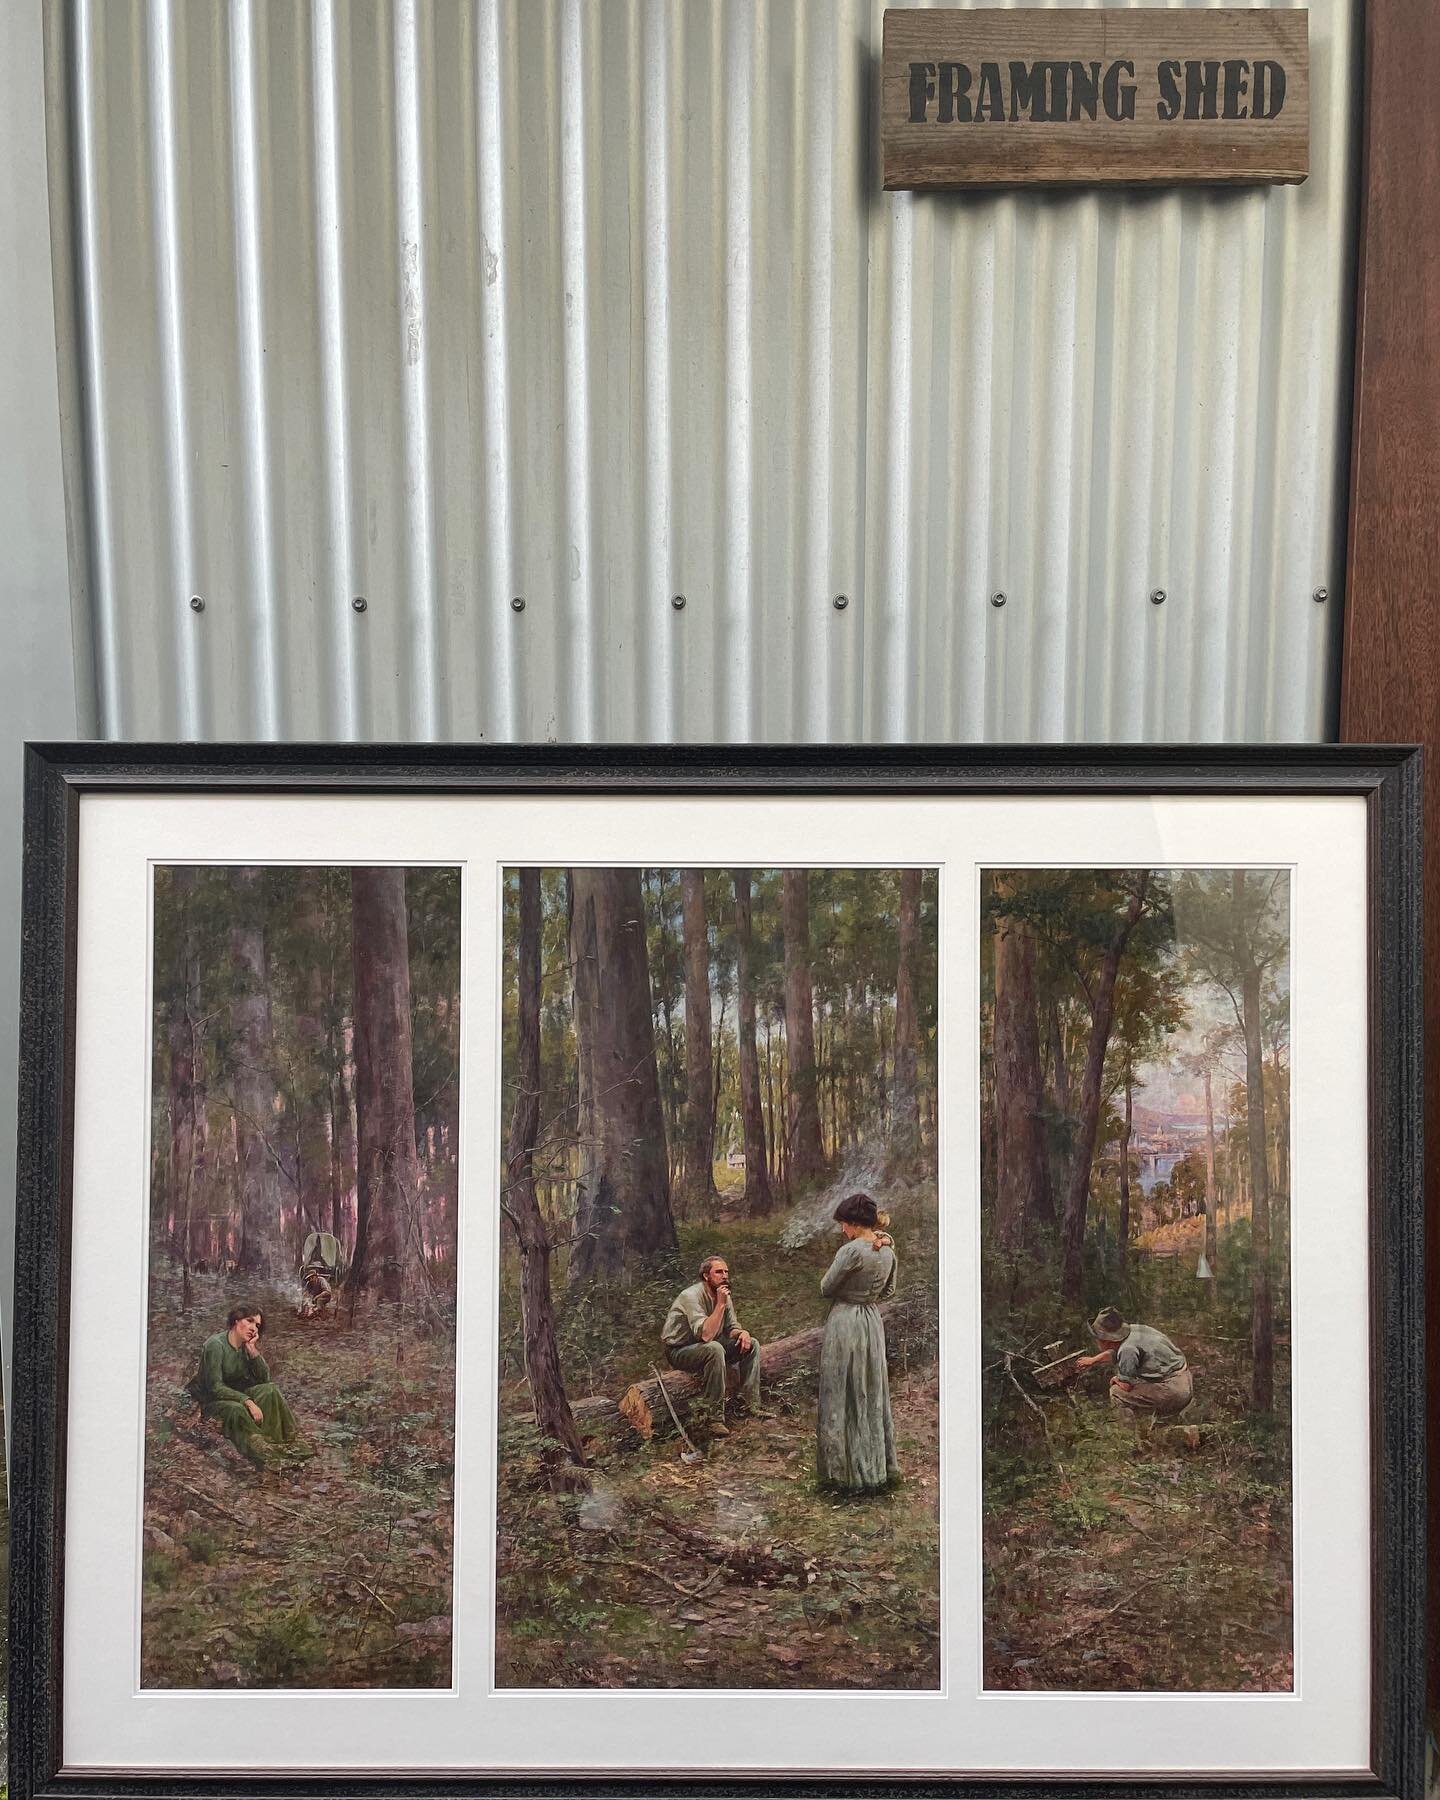 It started with an idea in the Photo Factory&hellip; and finished in the framing shed.